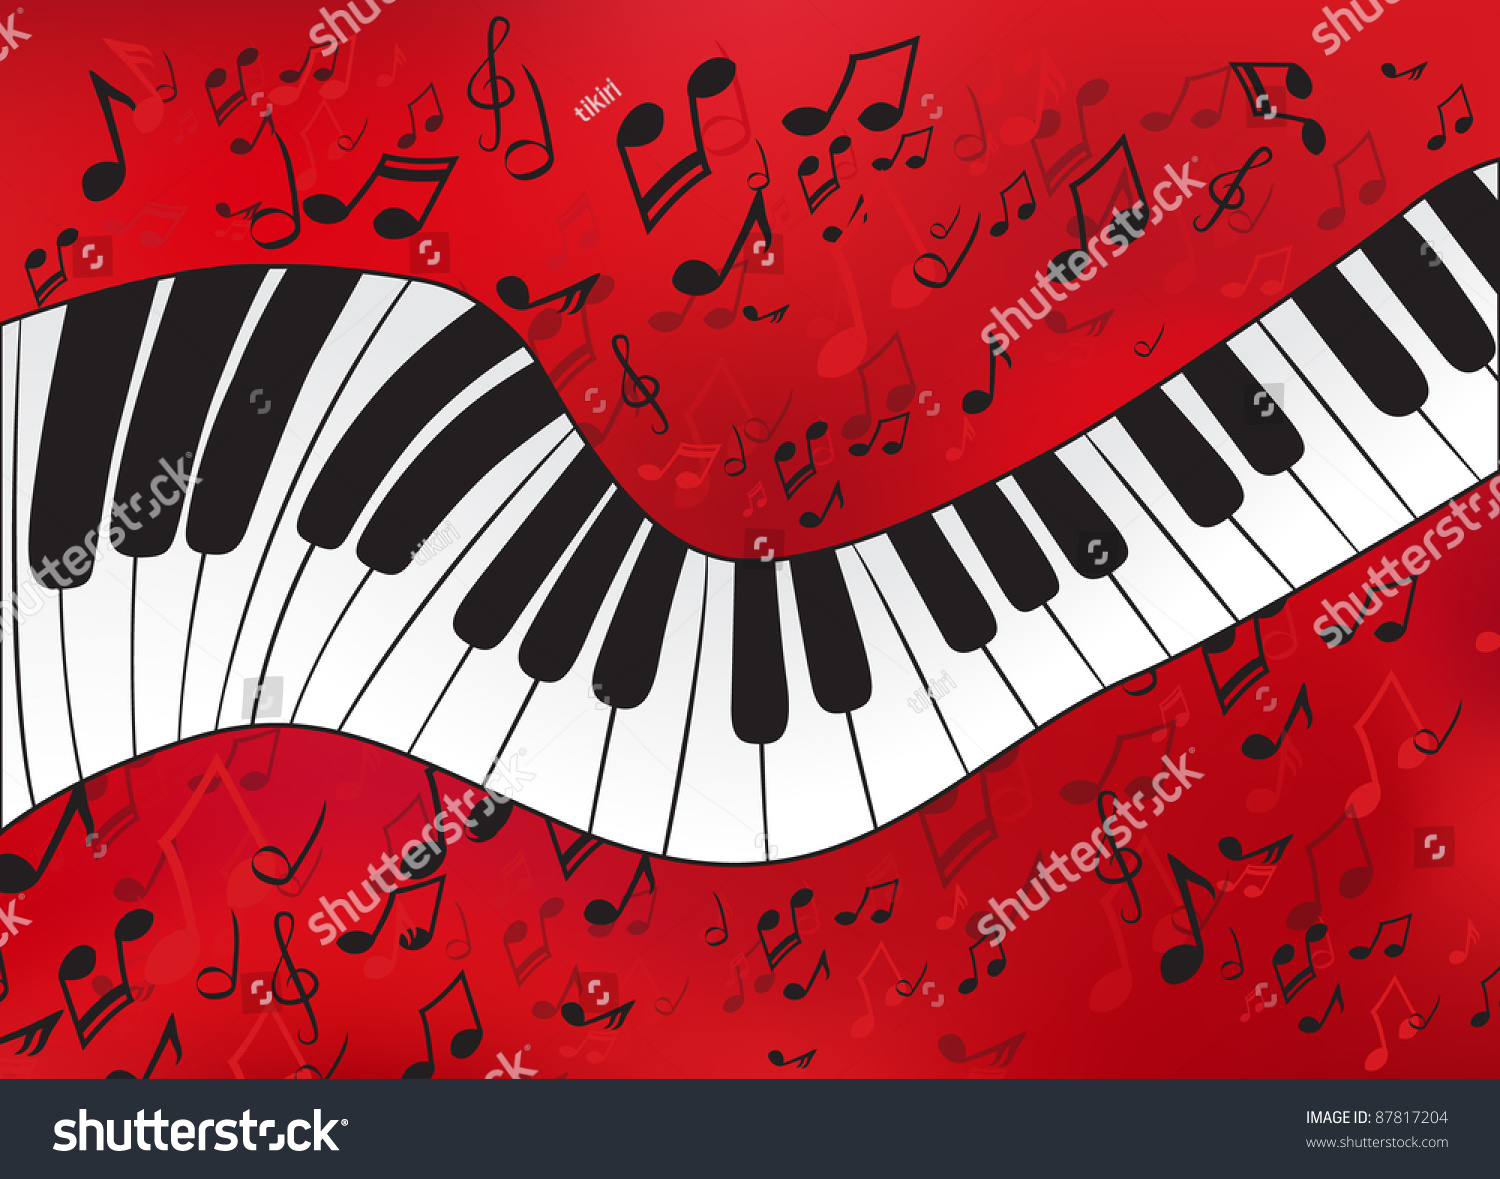 Abstract Piano With Scores On The Background Stock Vector 87817204 ...